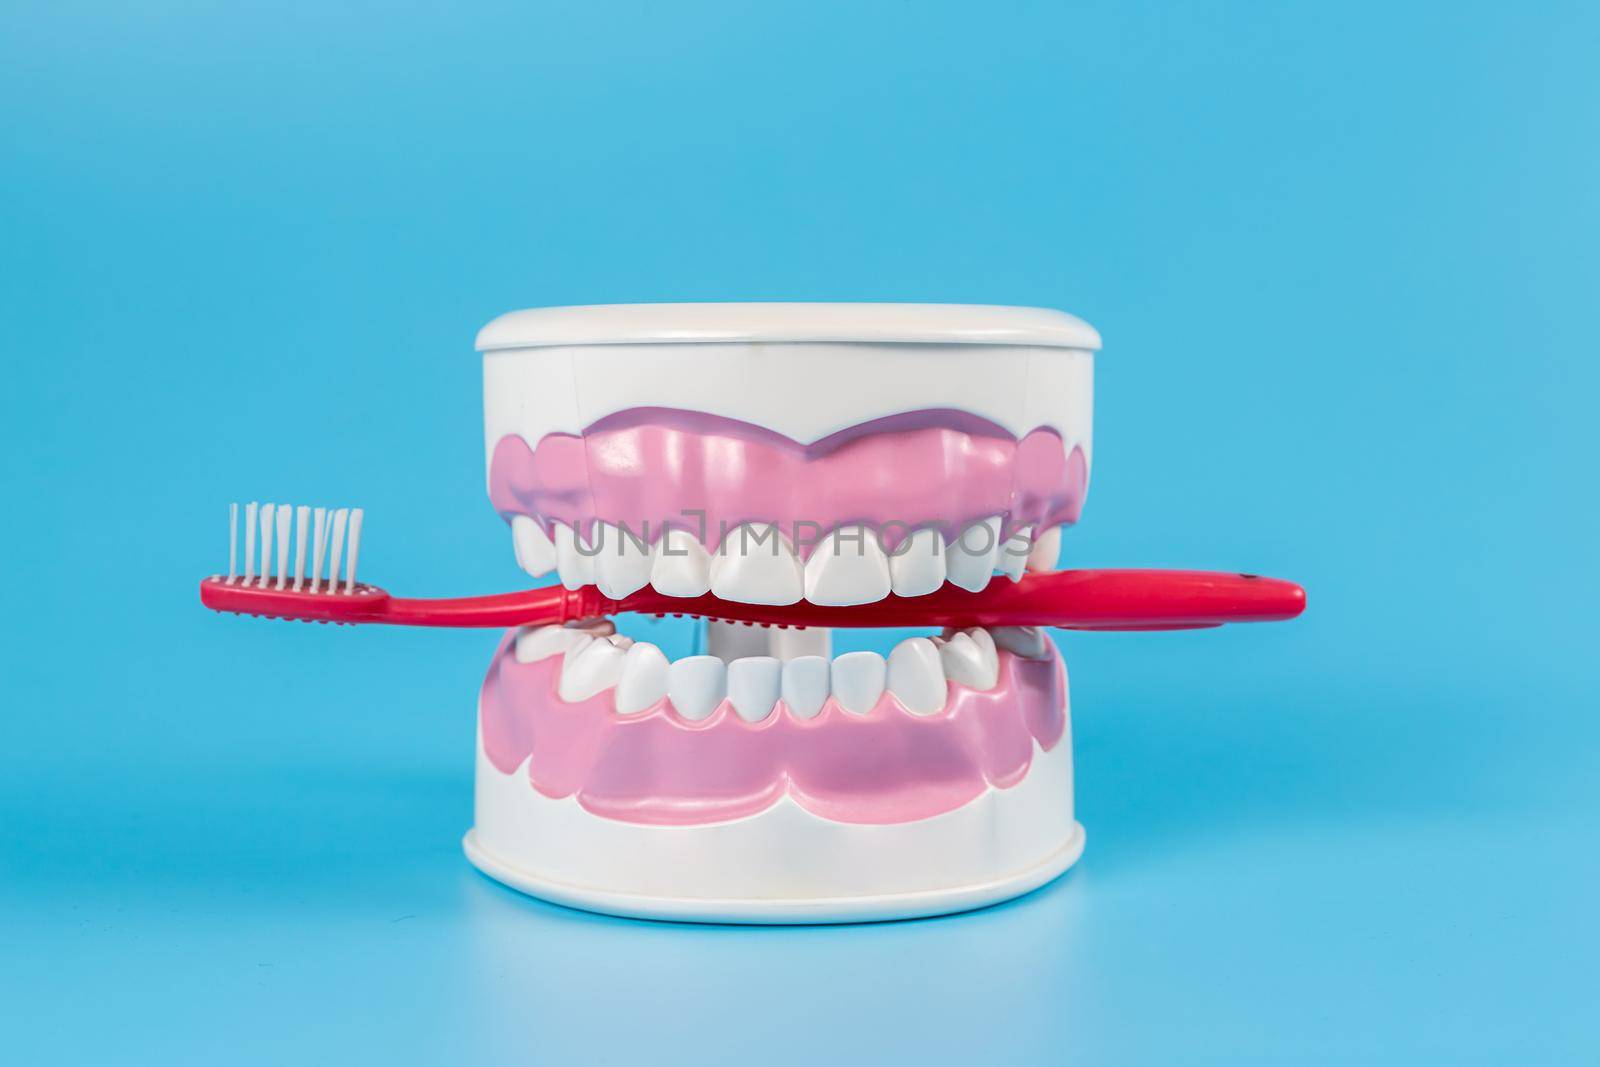 Clean teeth dental jaw model and red thooth brush on blue background. The concept of proper oral care, caries hygiene.